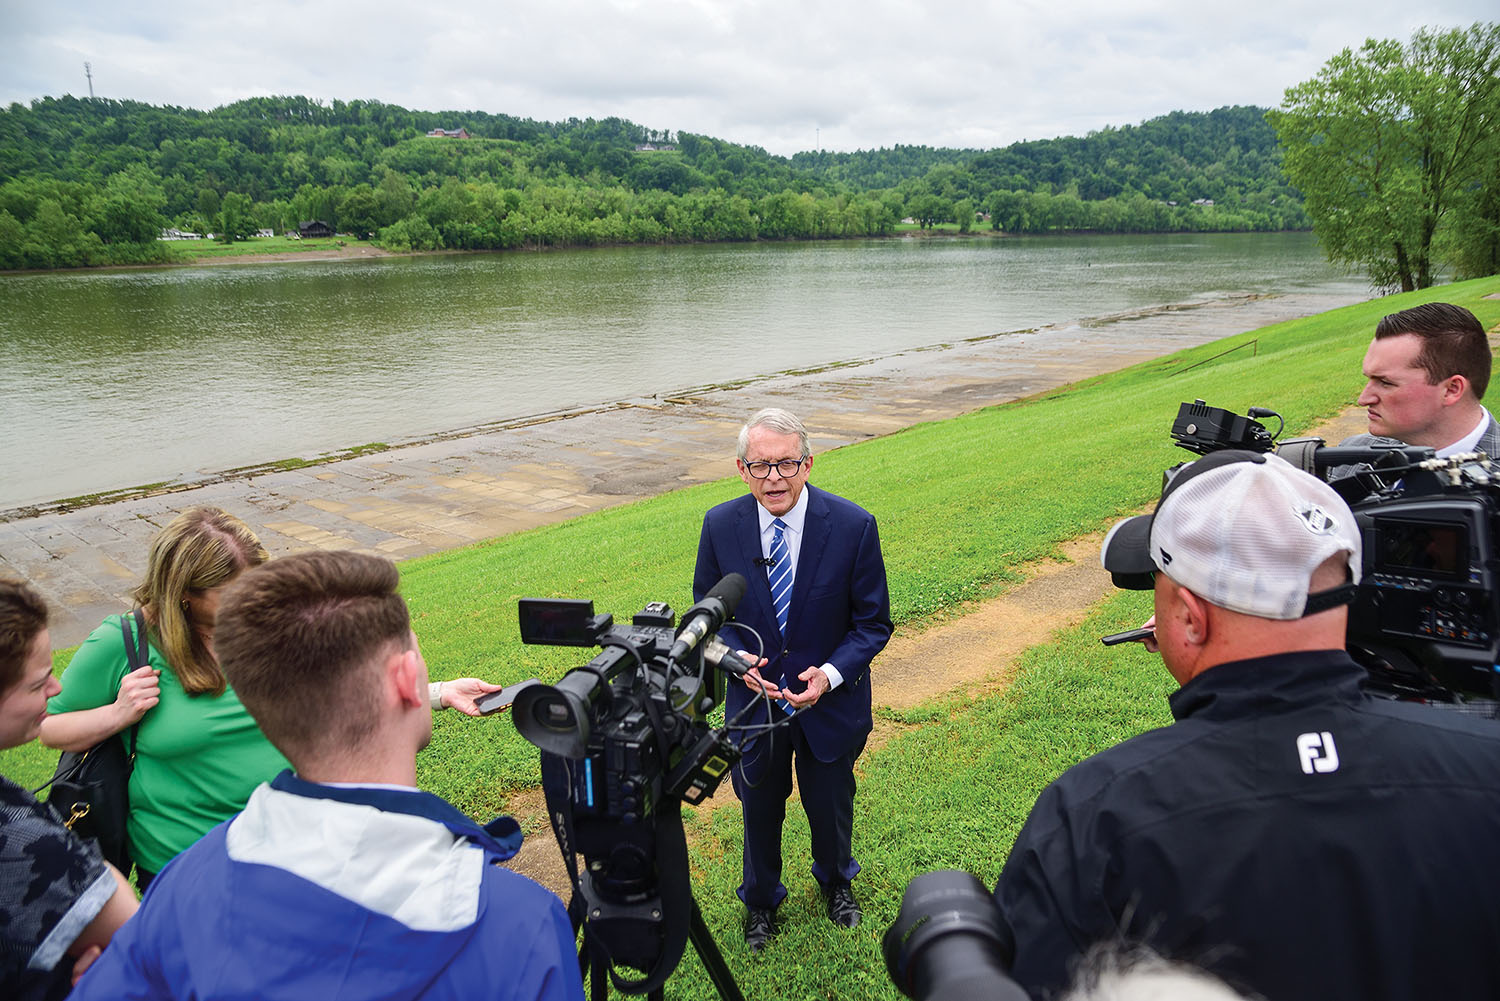 Ohio Gov. Mike DeWine speaks to local media on May 6 after announcing a $152 million plan for riverfront developments and downtown revitalization as part of Ohio’s Wonderful Waterfronts Initiative. He announced the program at the former Ohio River Lock and Dam 27 at Mile 301.0. (Photo by Jim Ross)